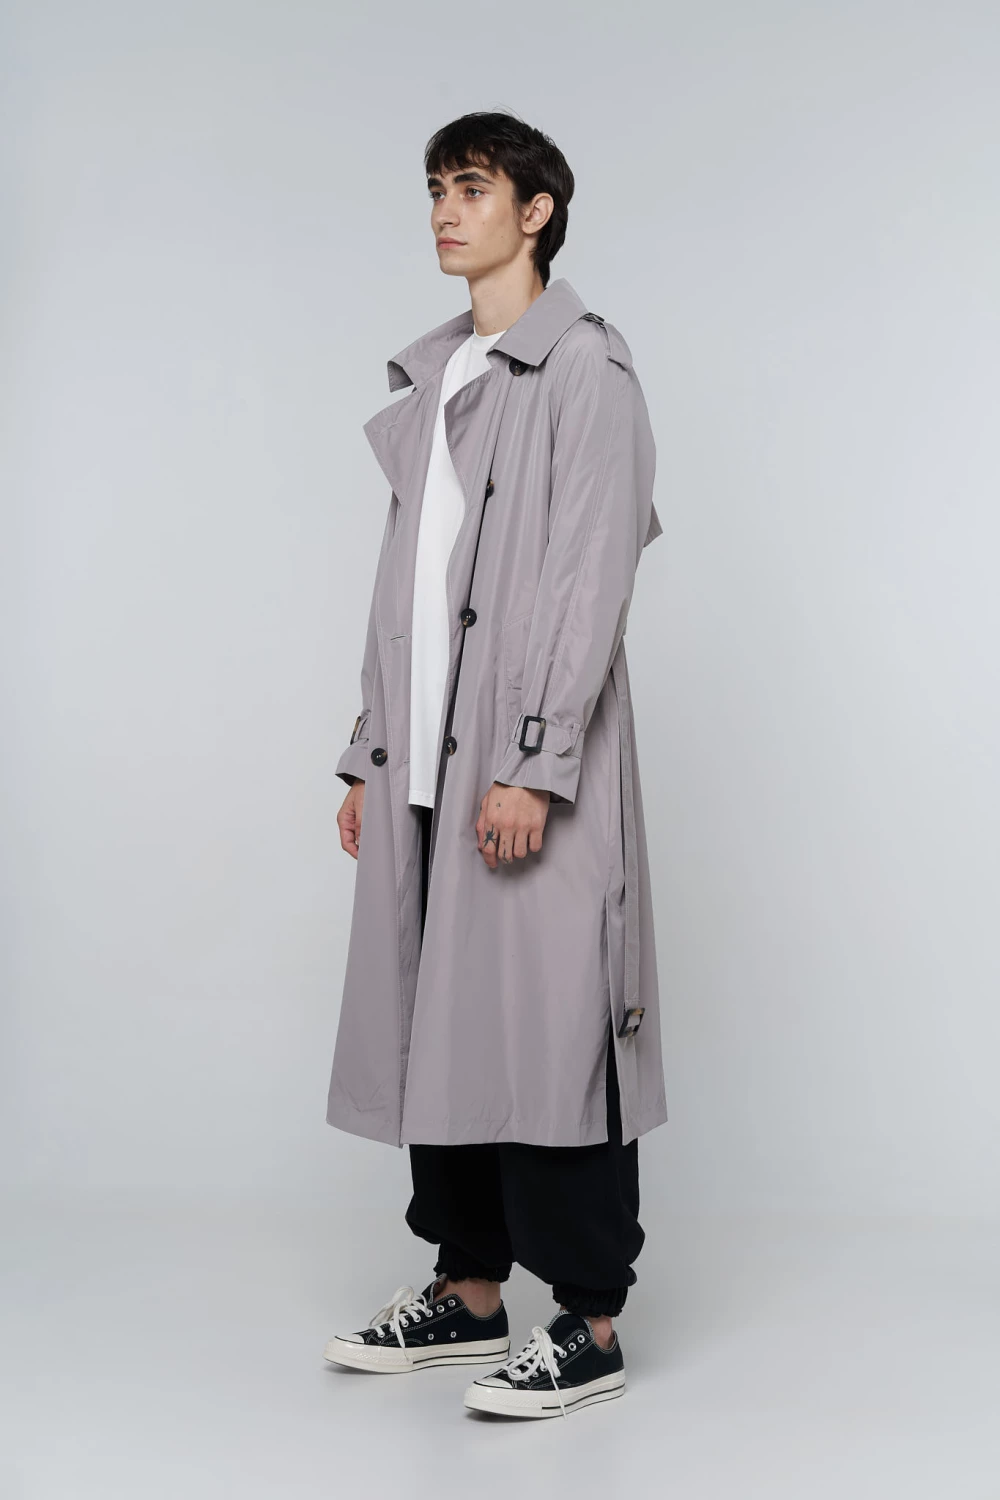 80s trench coat in grey color